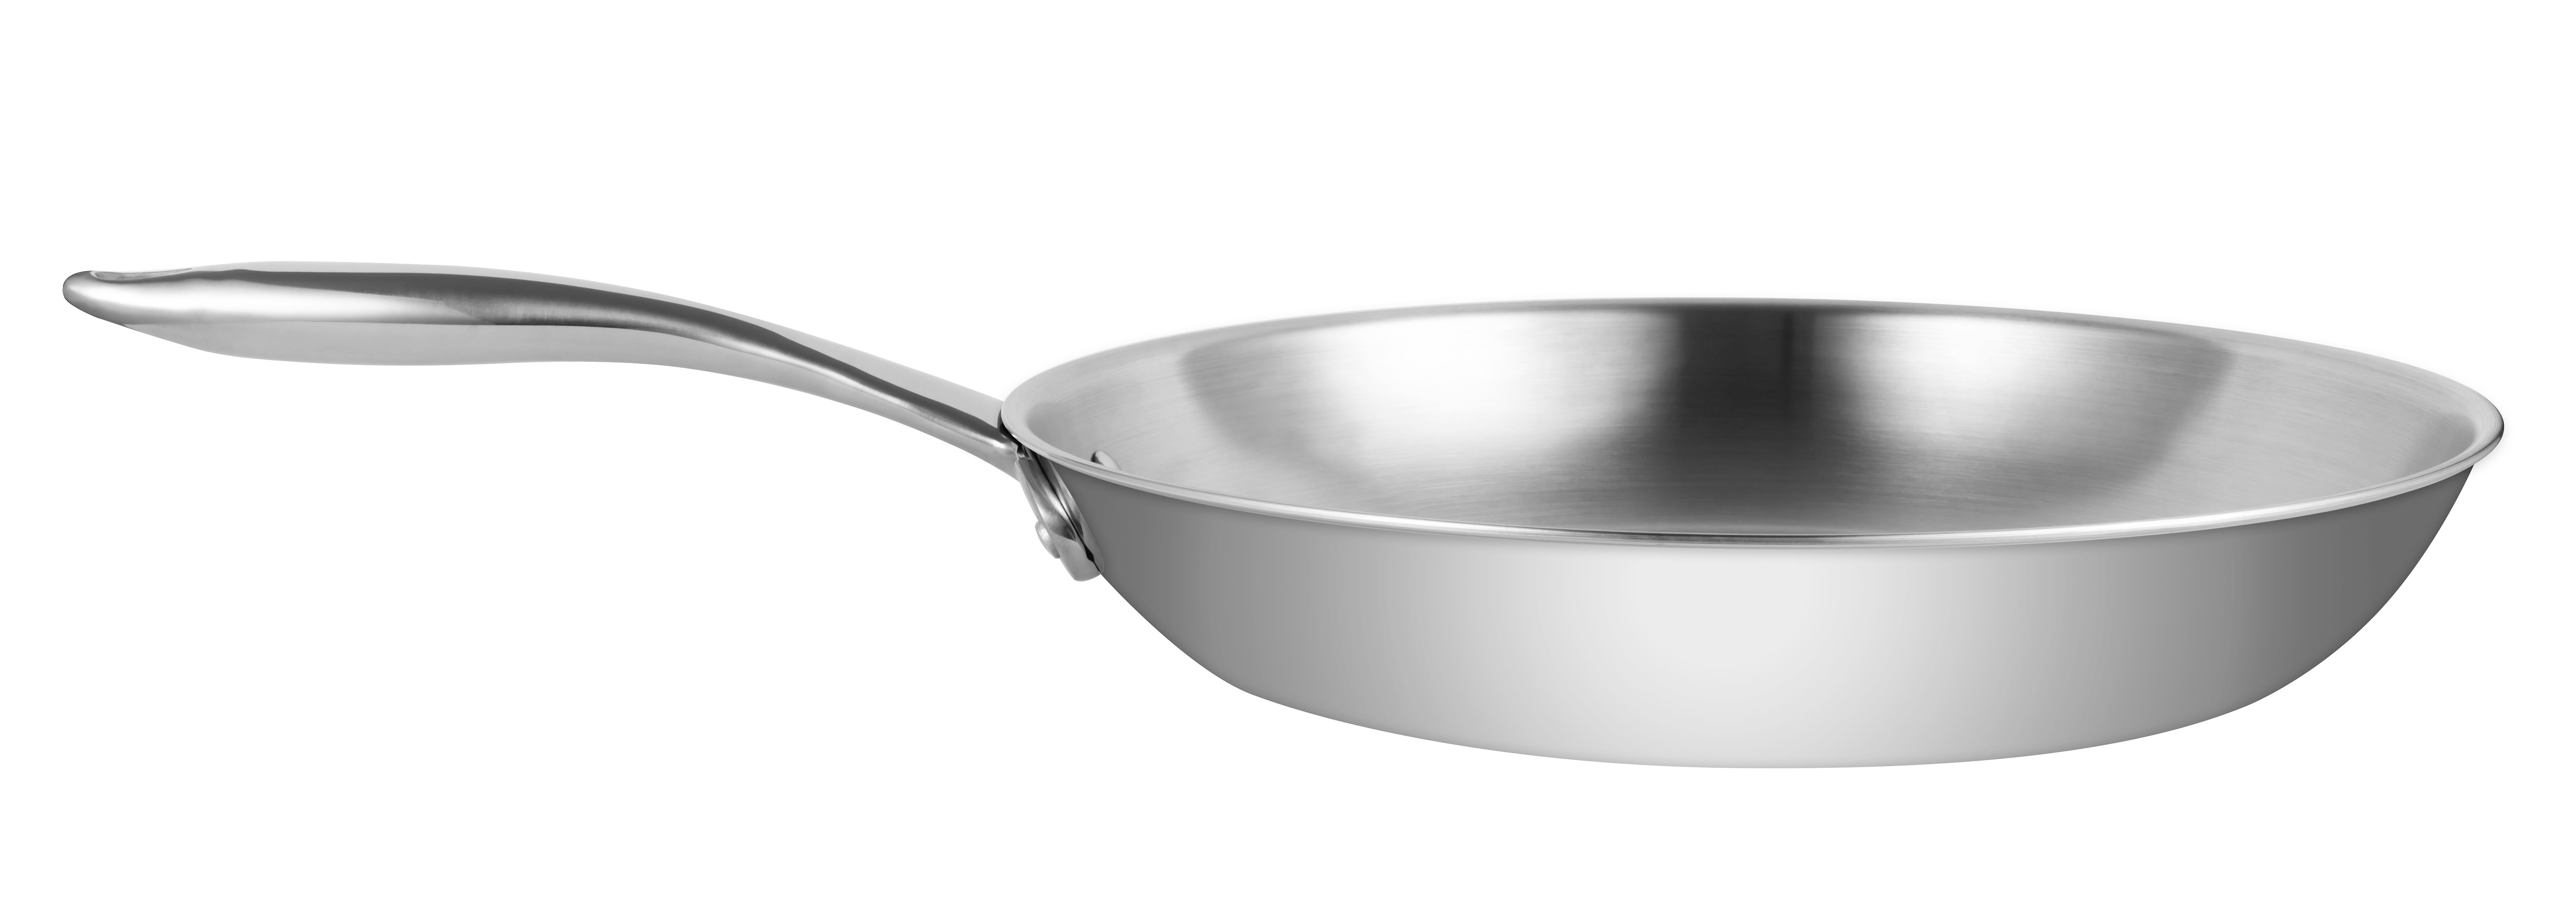  12 Stainless Steel Pan by Ozeri with ETERNA, a 100% PFOA and  APEO-Free Non-Stick Coating